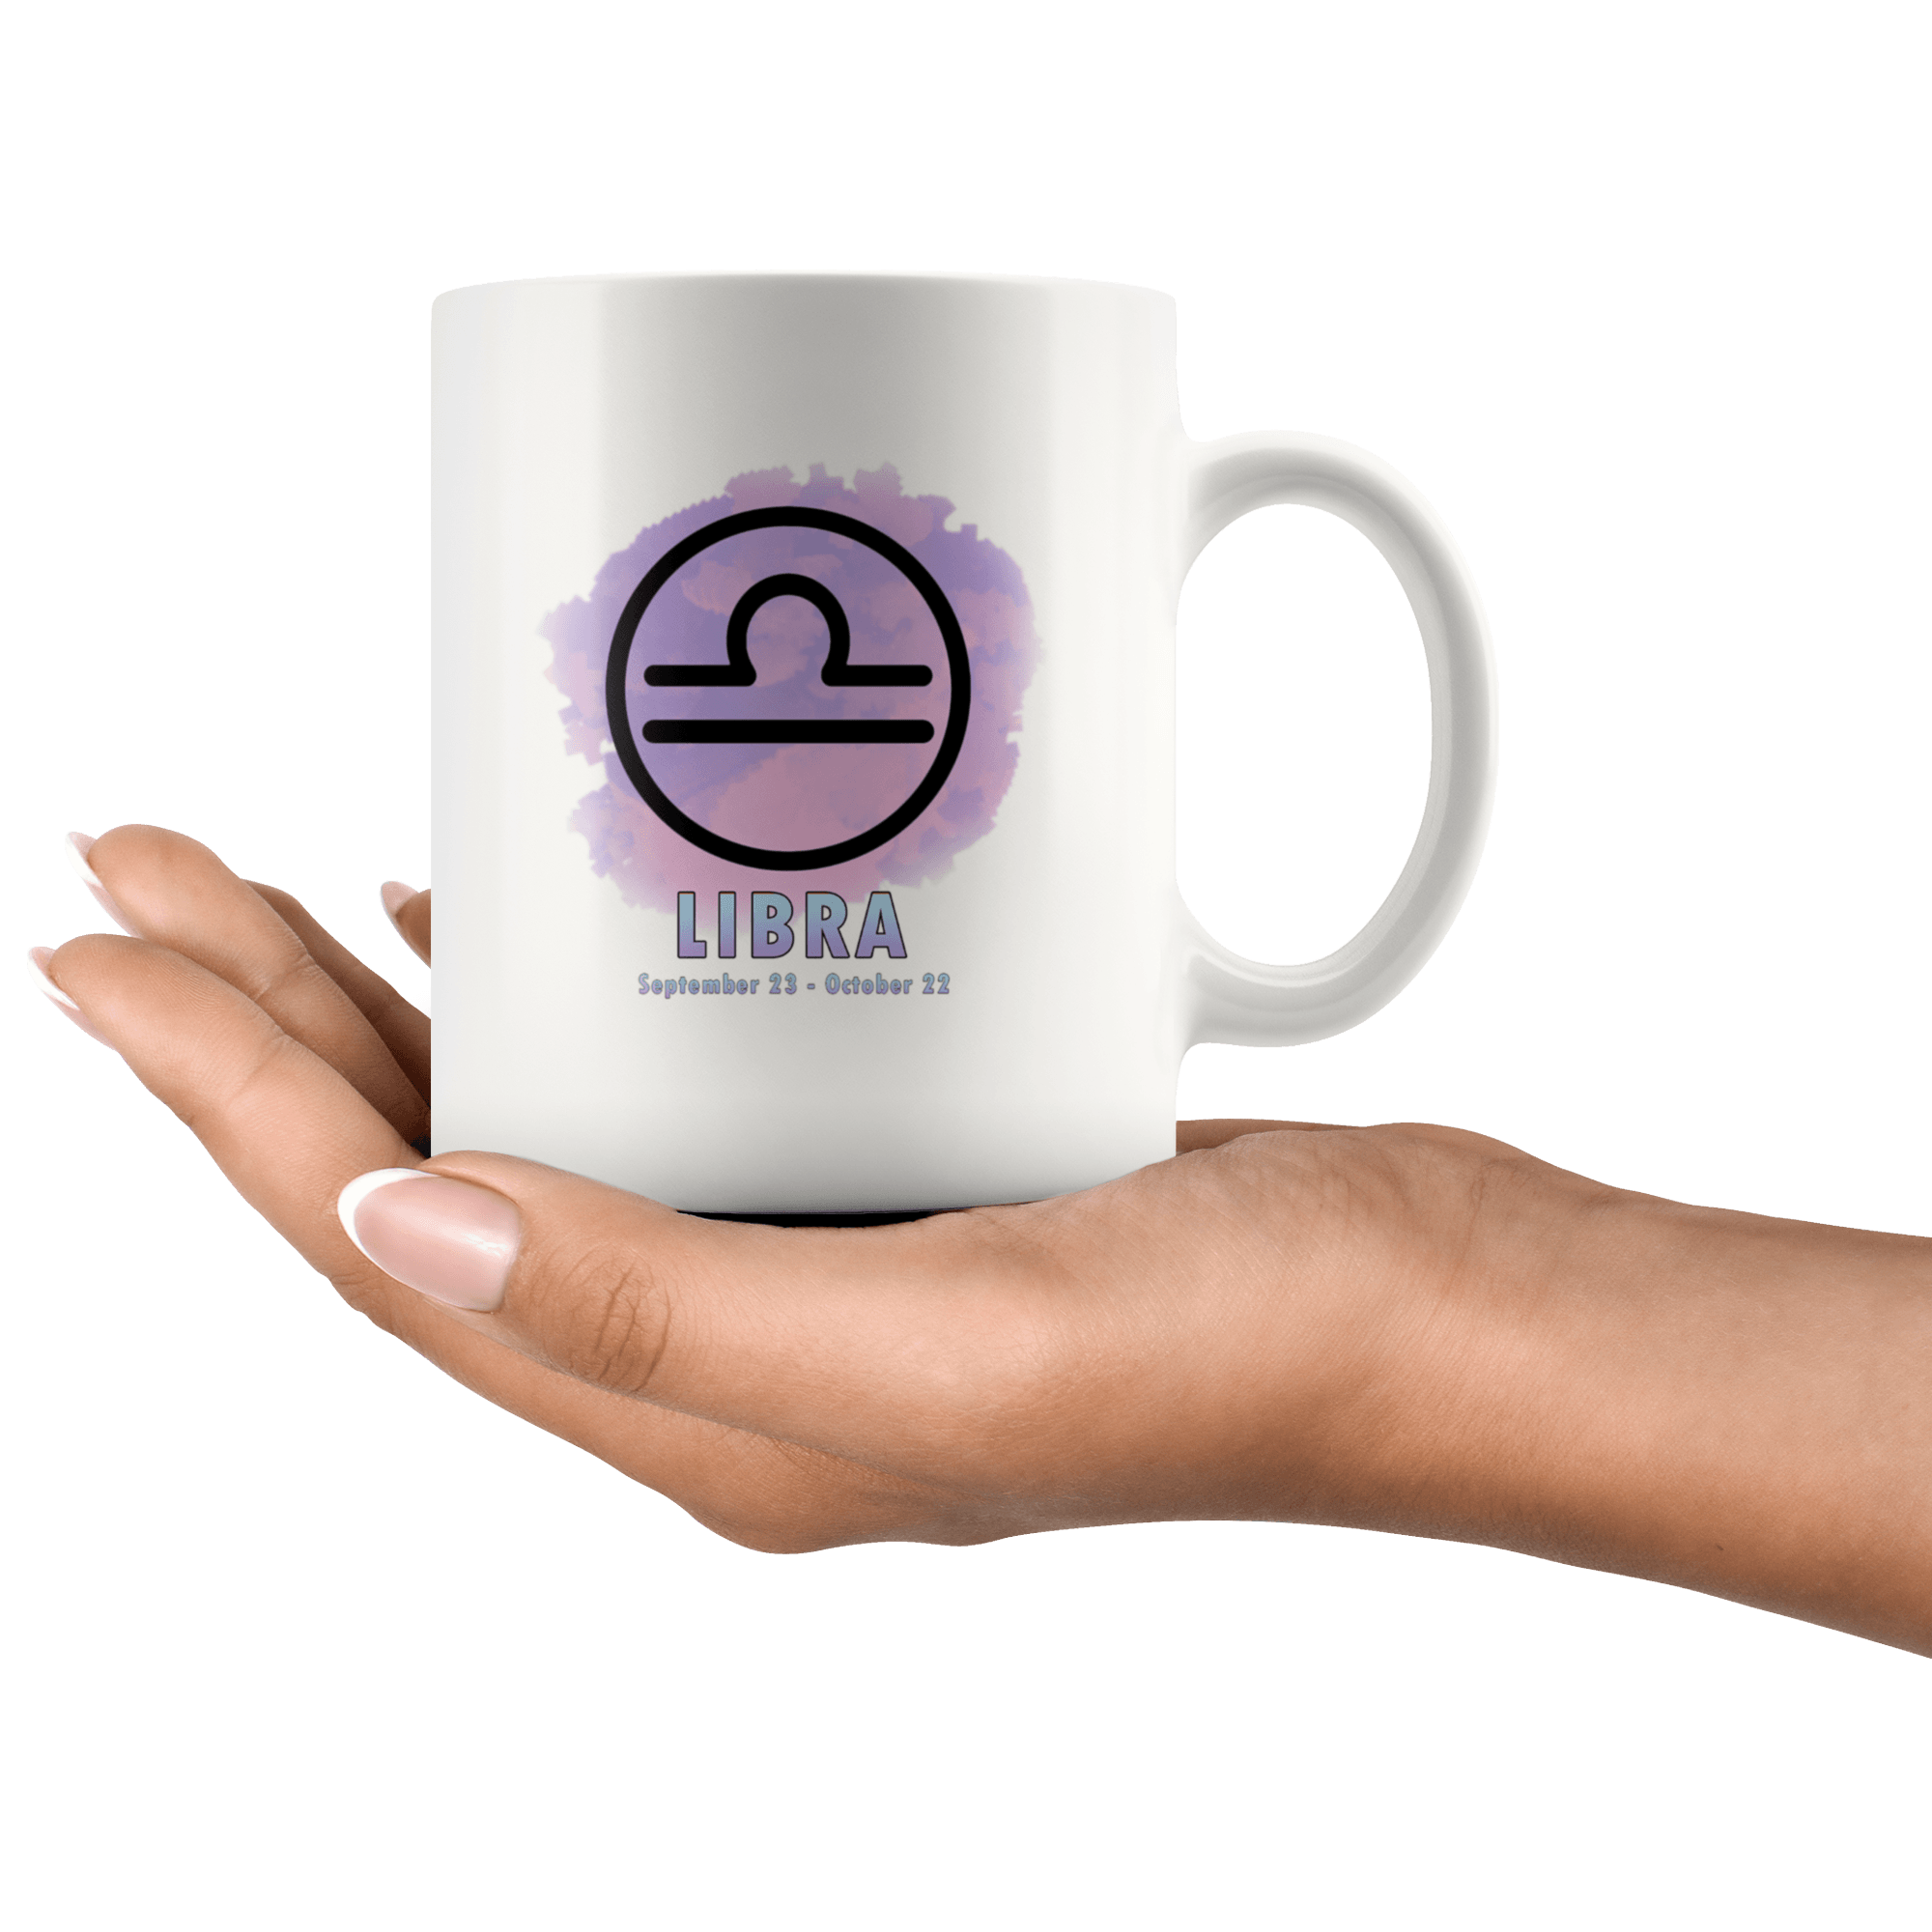 Libra Coffee Mug - Libra Constellation Coffee Cup - Zodiac Gifts For Horoscope Lover Born in September or October - SPCM